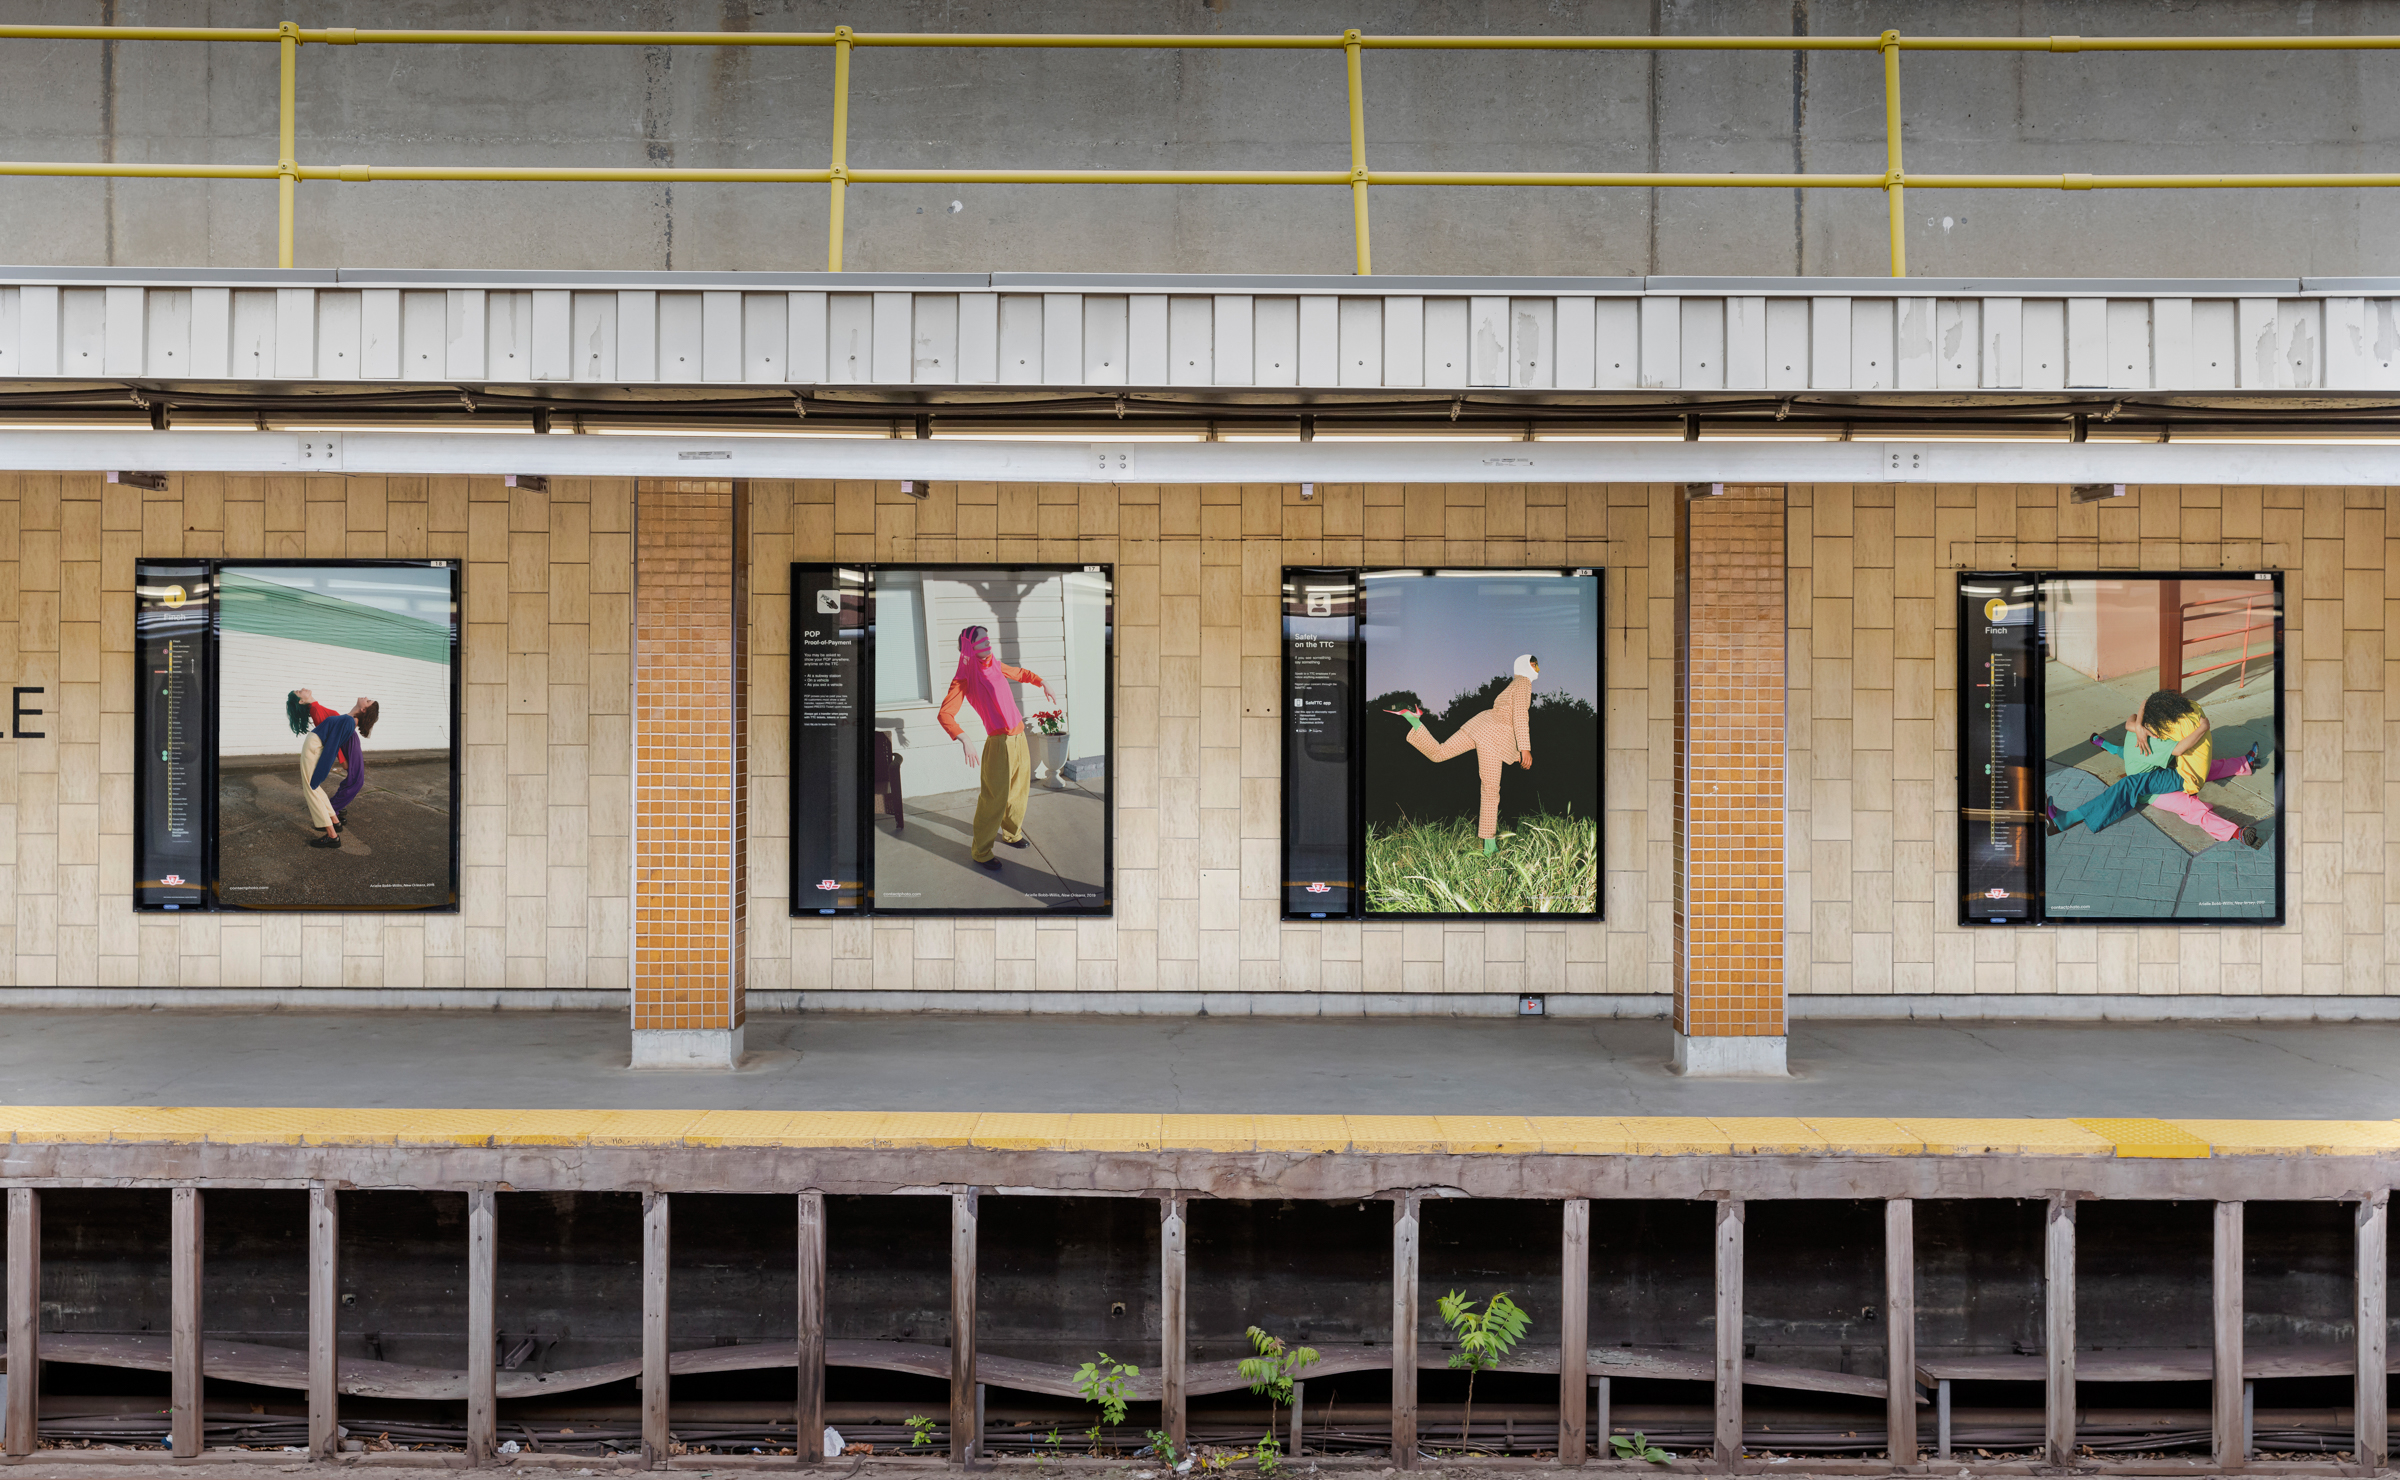     Arielle Bob-Willis, Furiously Happy, 2024, installation view, posters at Davisville Subway Station, Toronto, Courtesy of the artist and CONTACT Photography Festival. Photo: Toni Hafkenscheid

